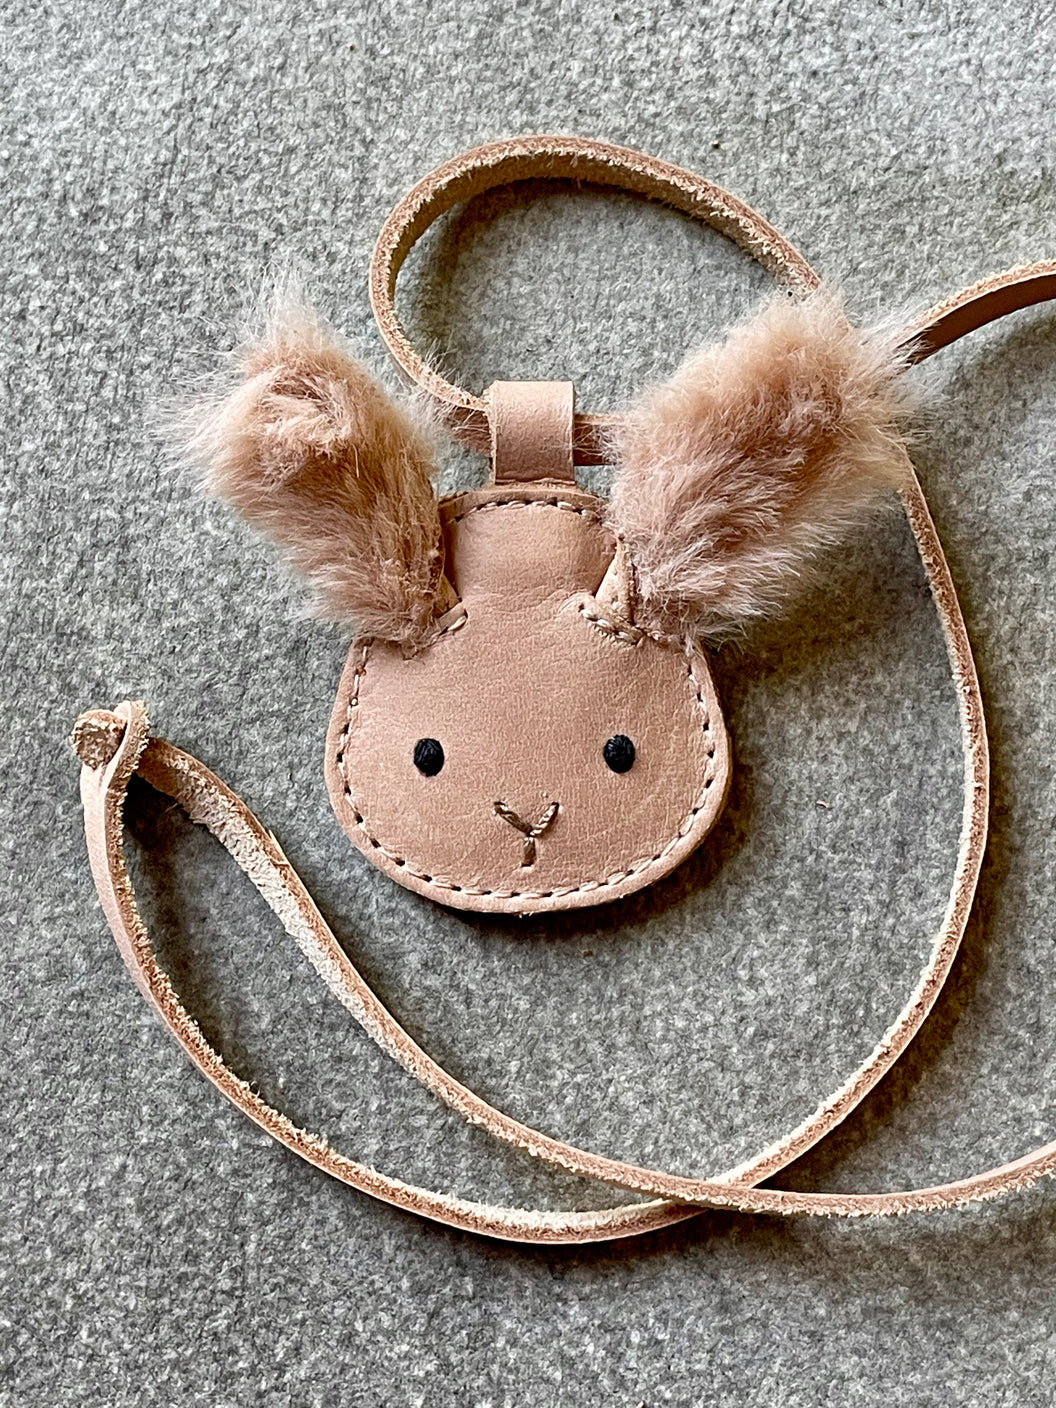 Wookie Necklace - Winter Bunny *LAST ONE*